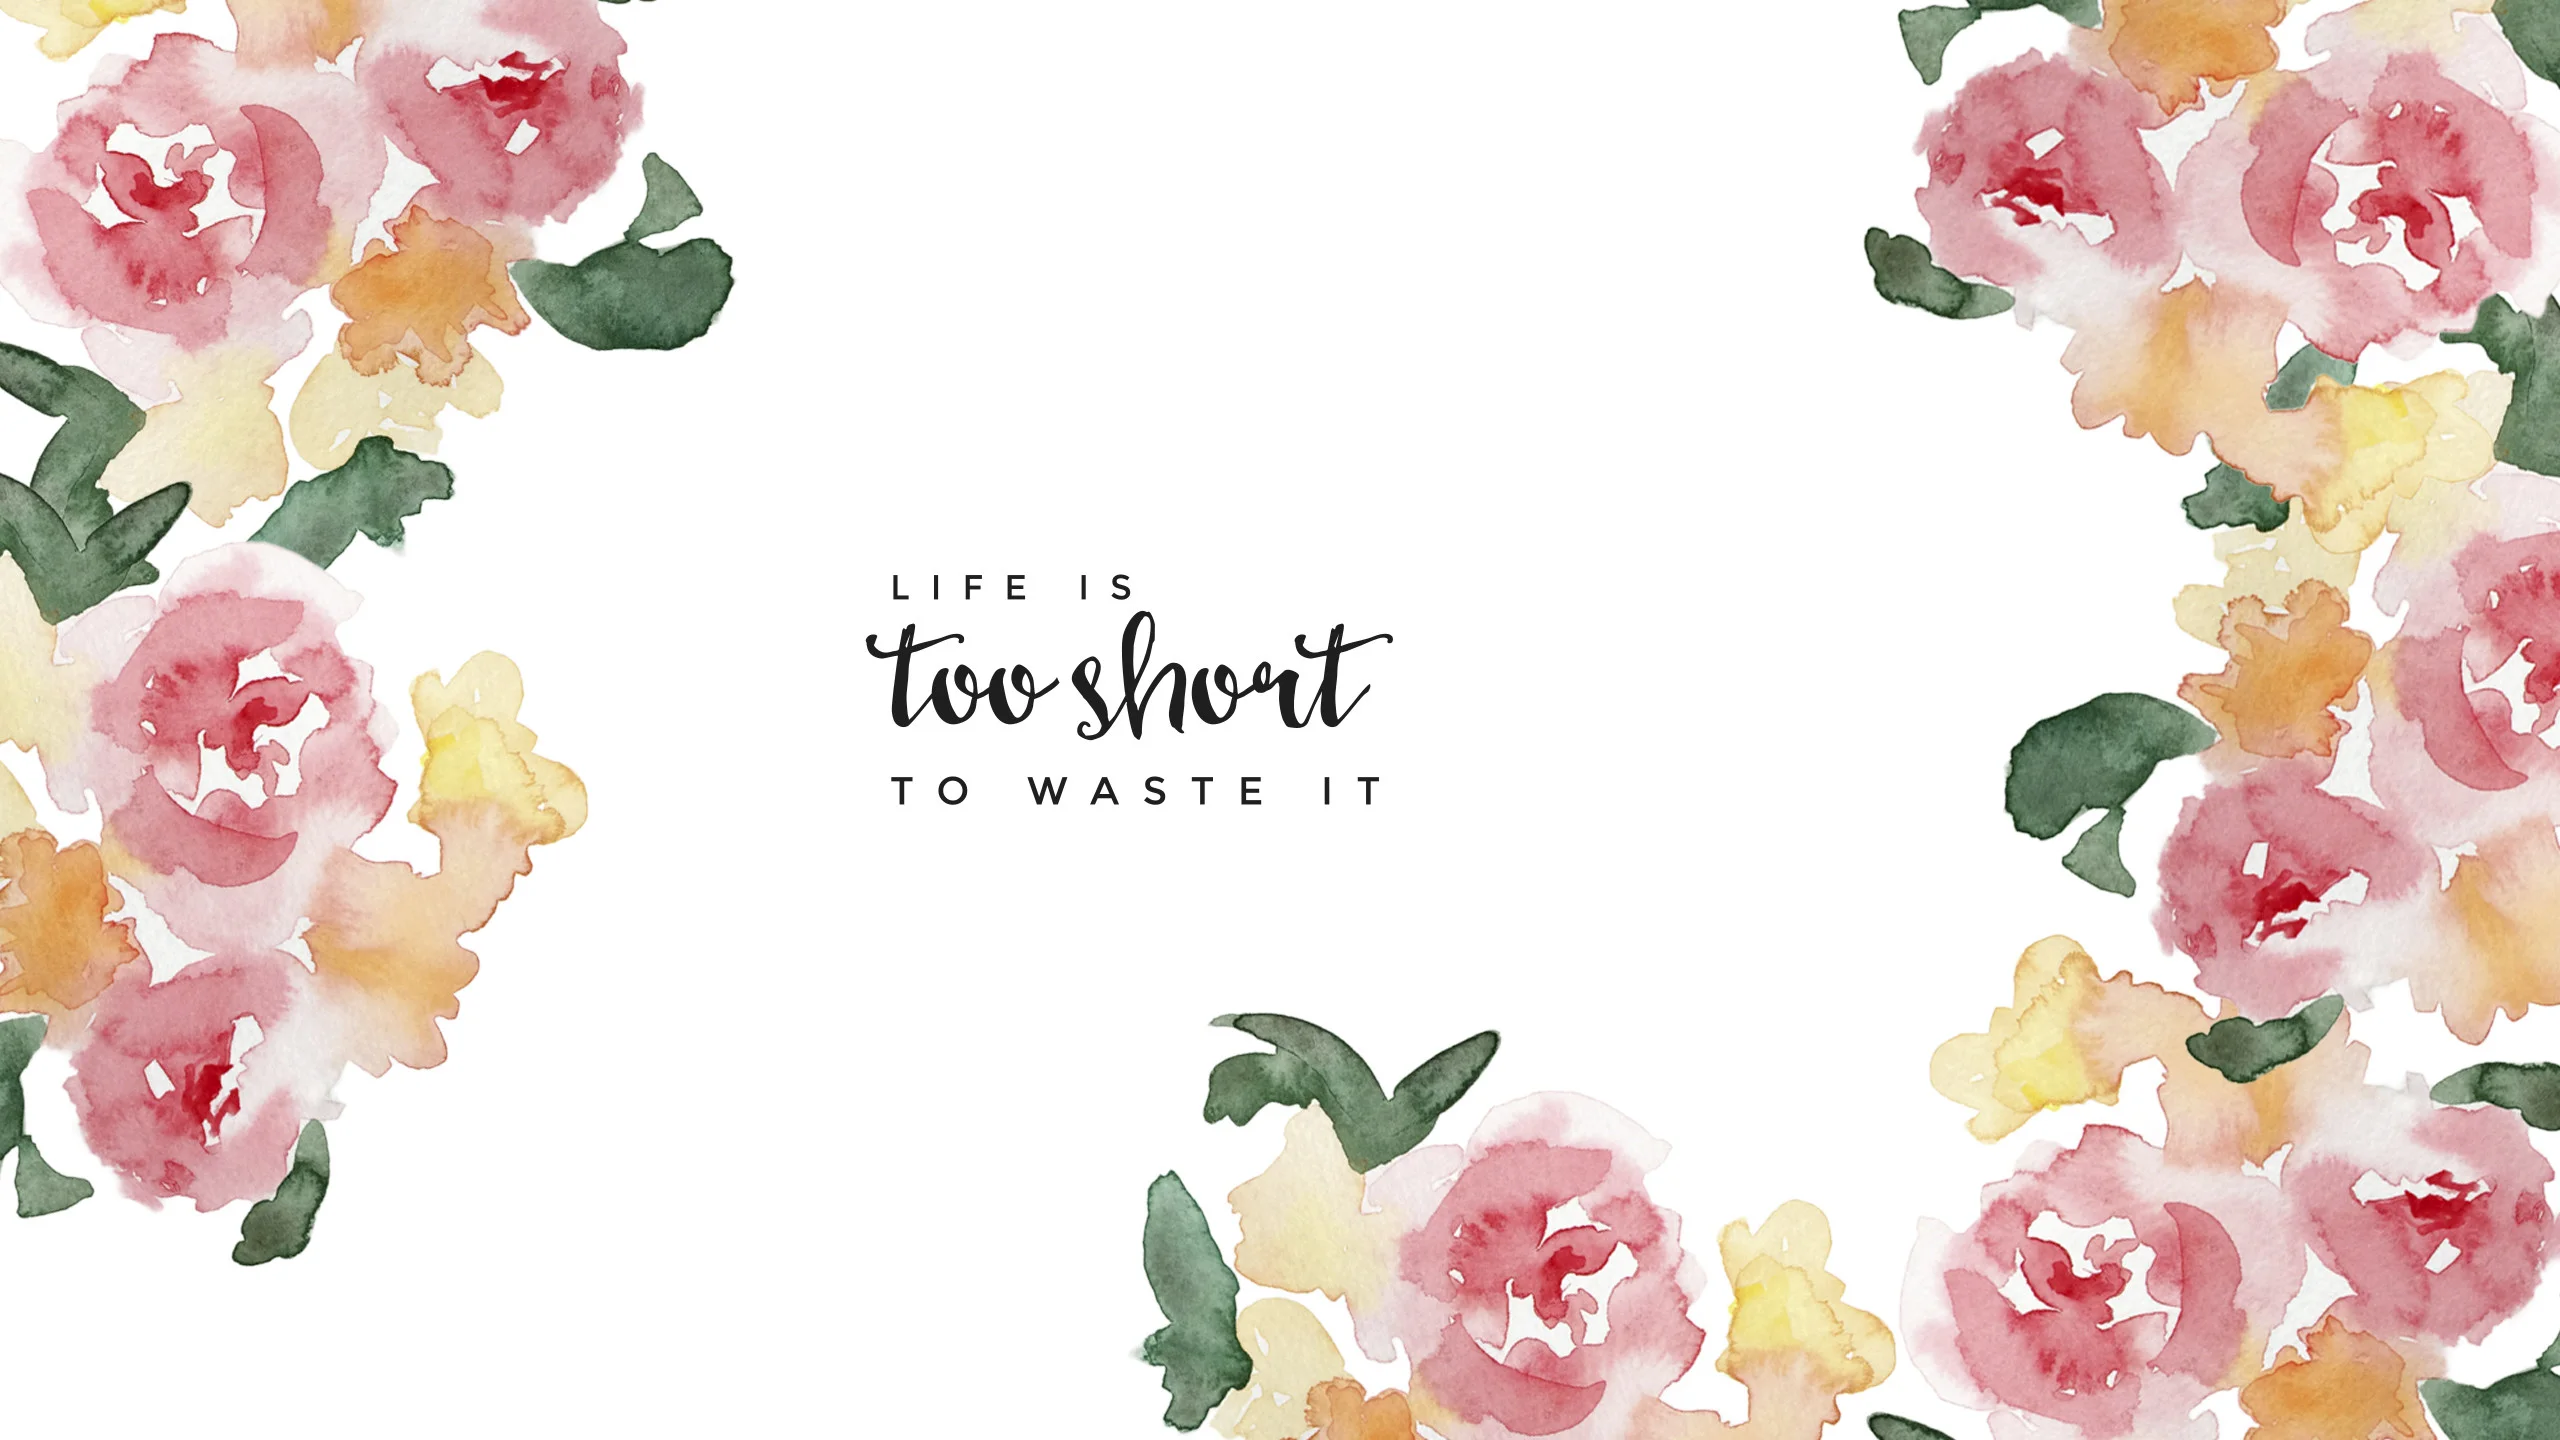 Free iMac wallpaper LIFE IS TOO SHORT TO WASTE IT #quotes #typography #design